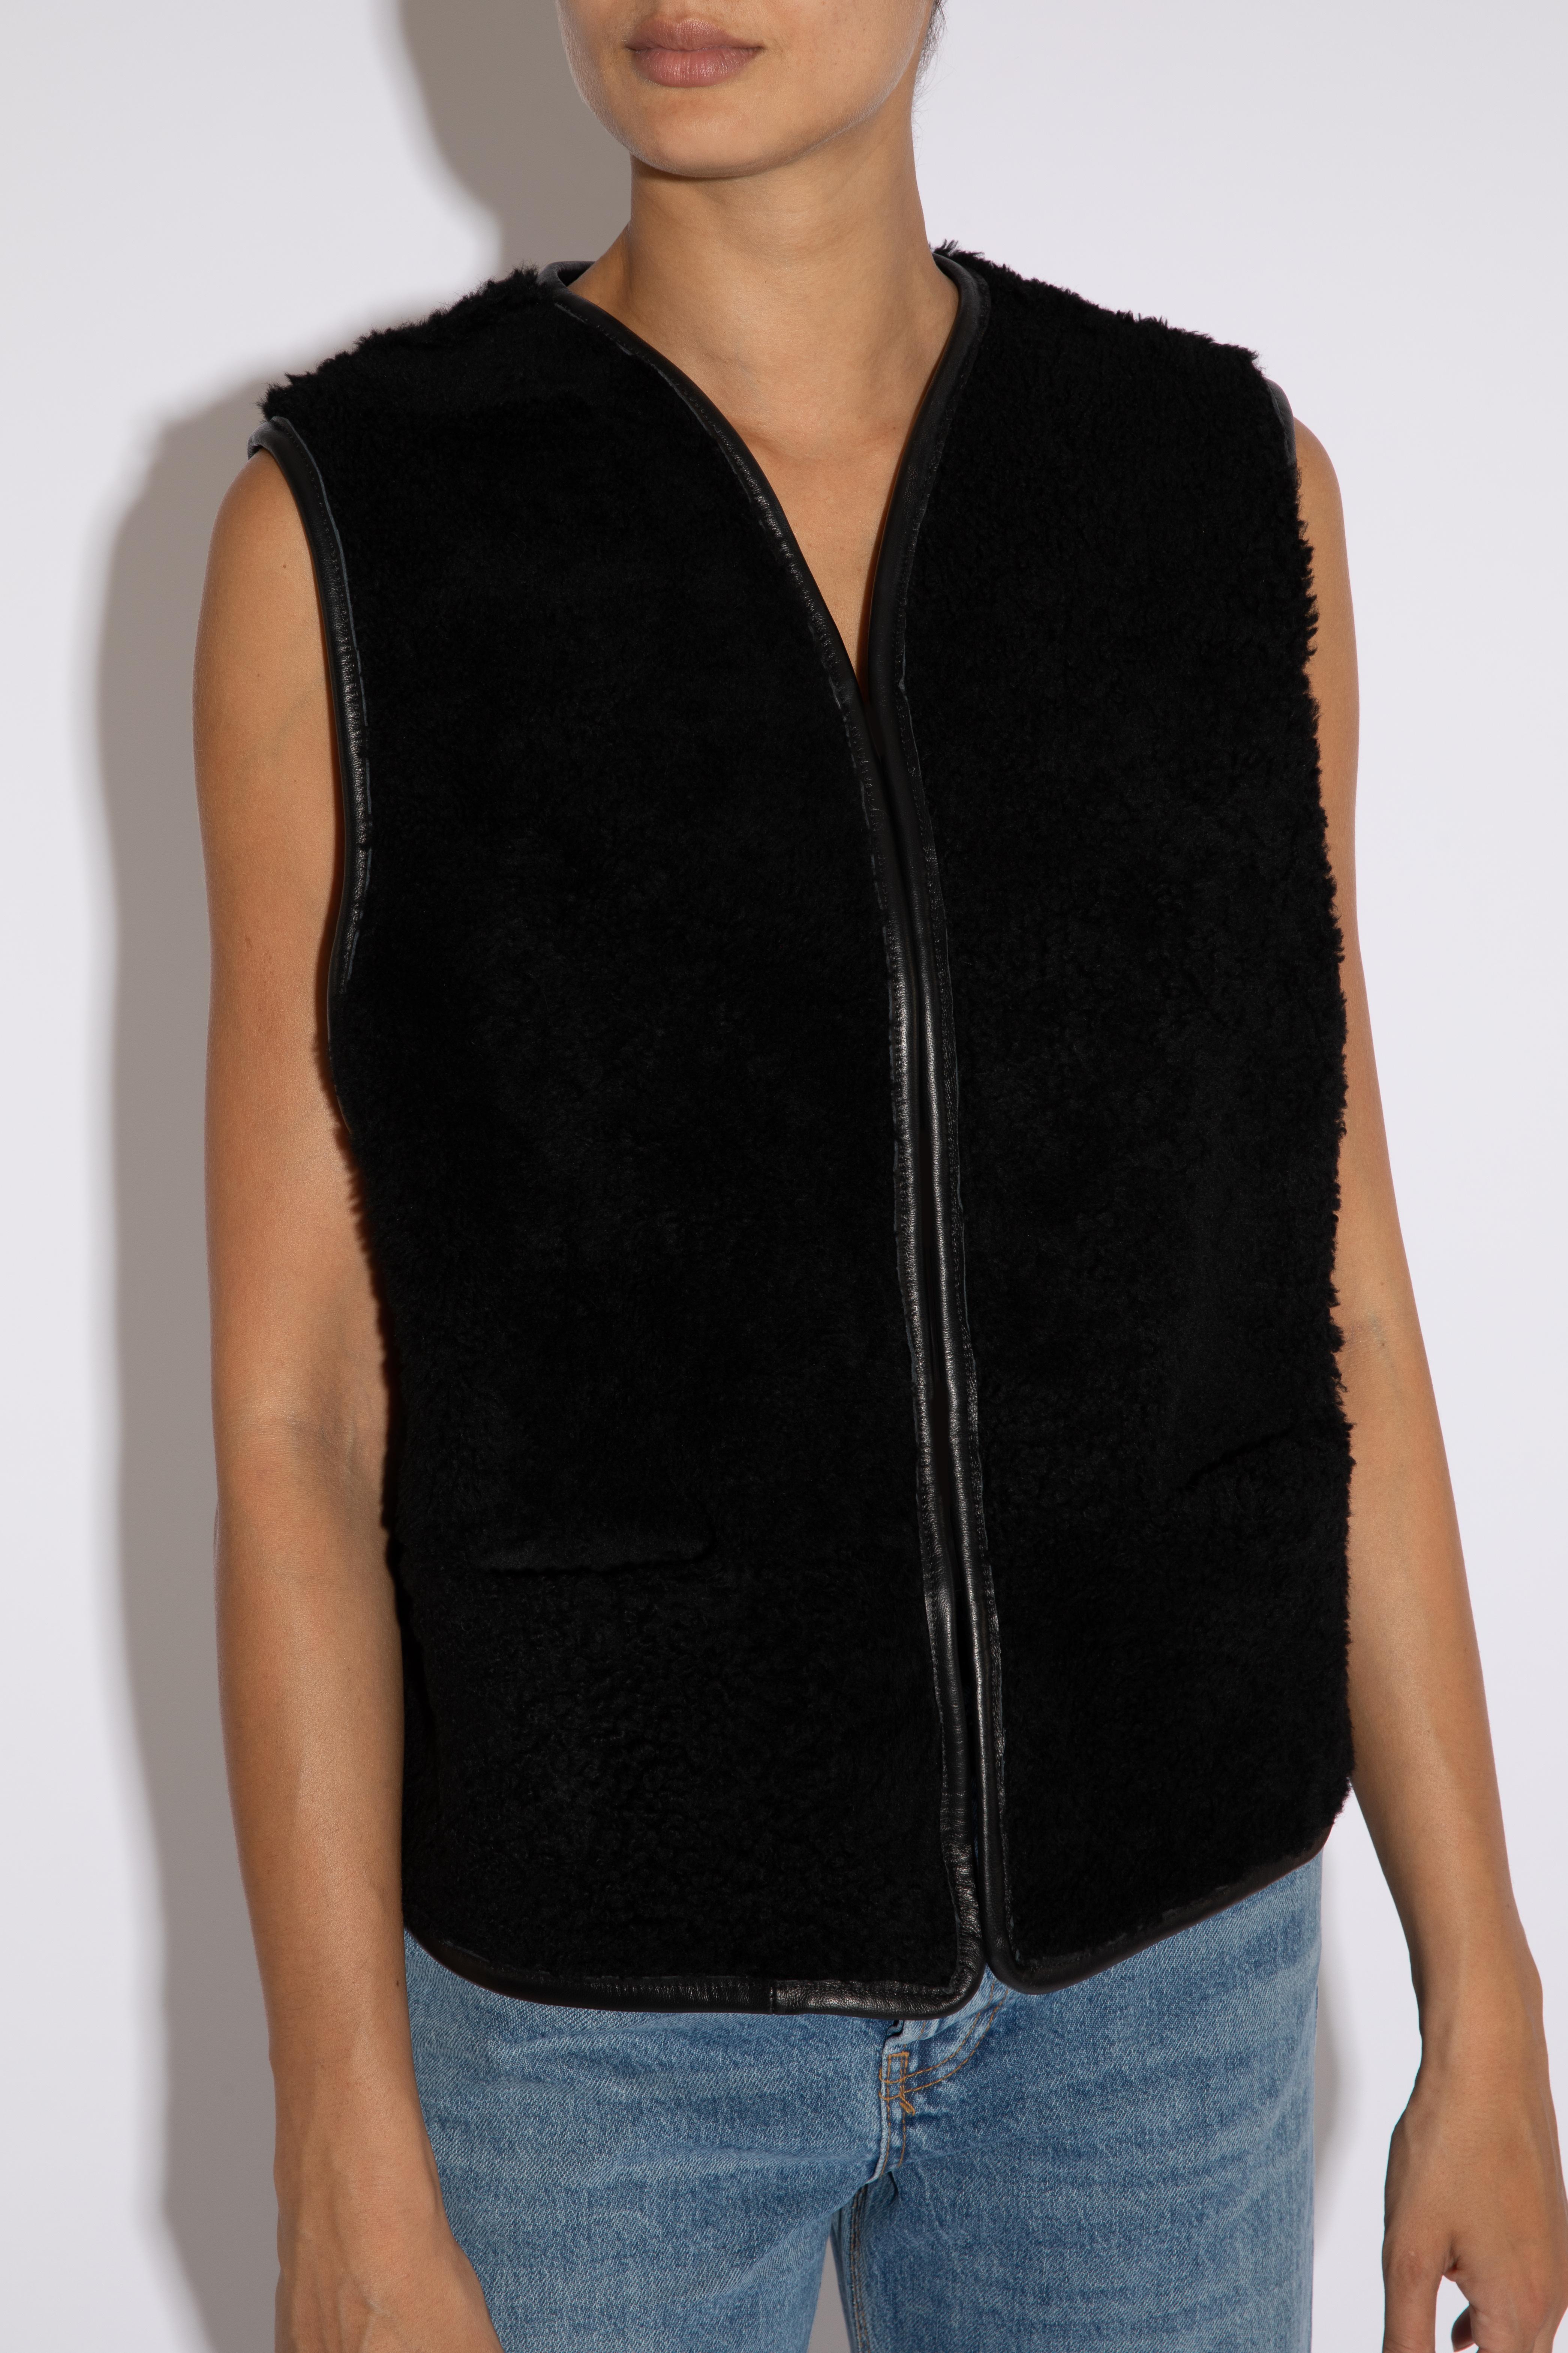 Verheyen London Reversible Shearling Gilet in Black - Size small

Handmade in London, made with lamb merino shearling this luxury item is an investment piece to wear for a lifetime.  One side is leather and one side is merino shearling. Ideal for